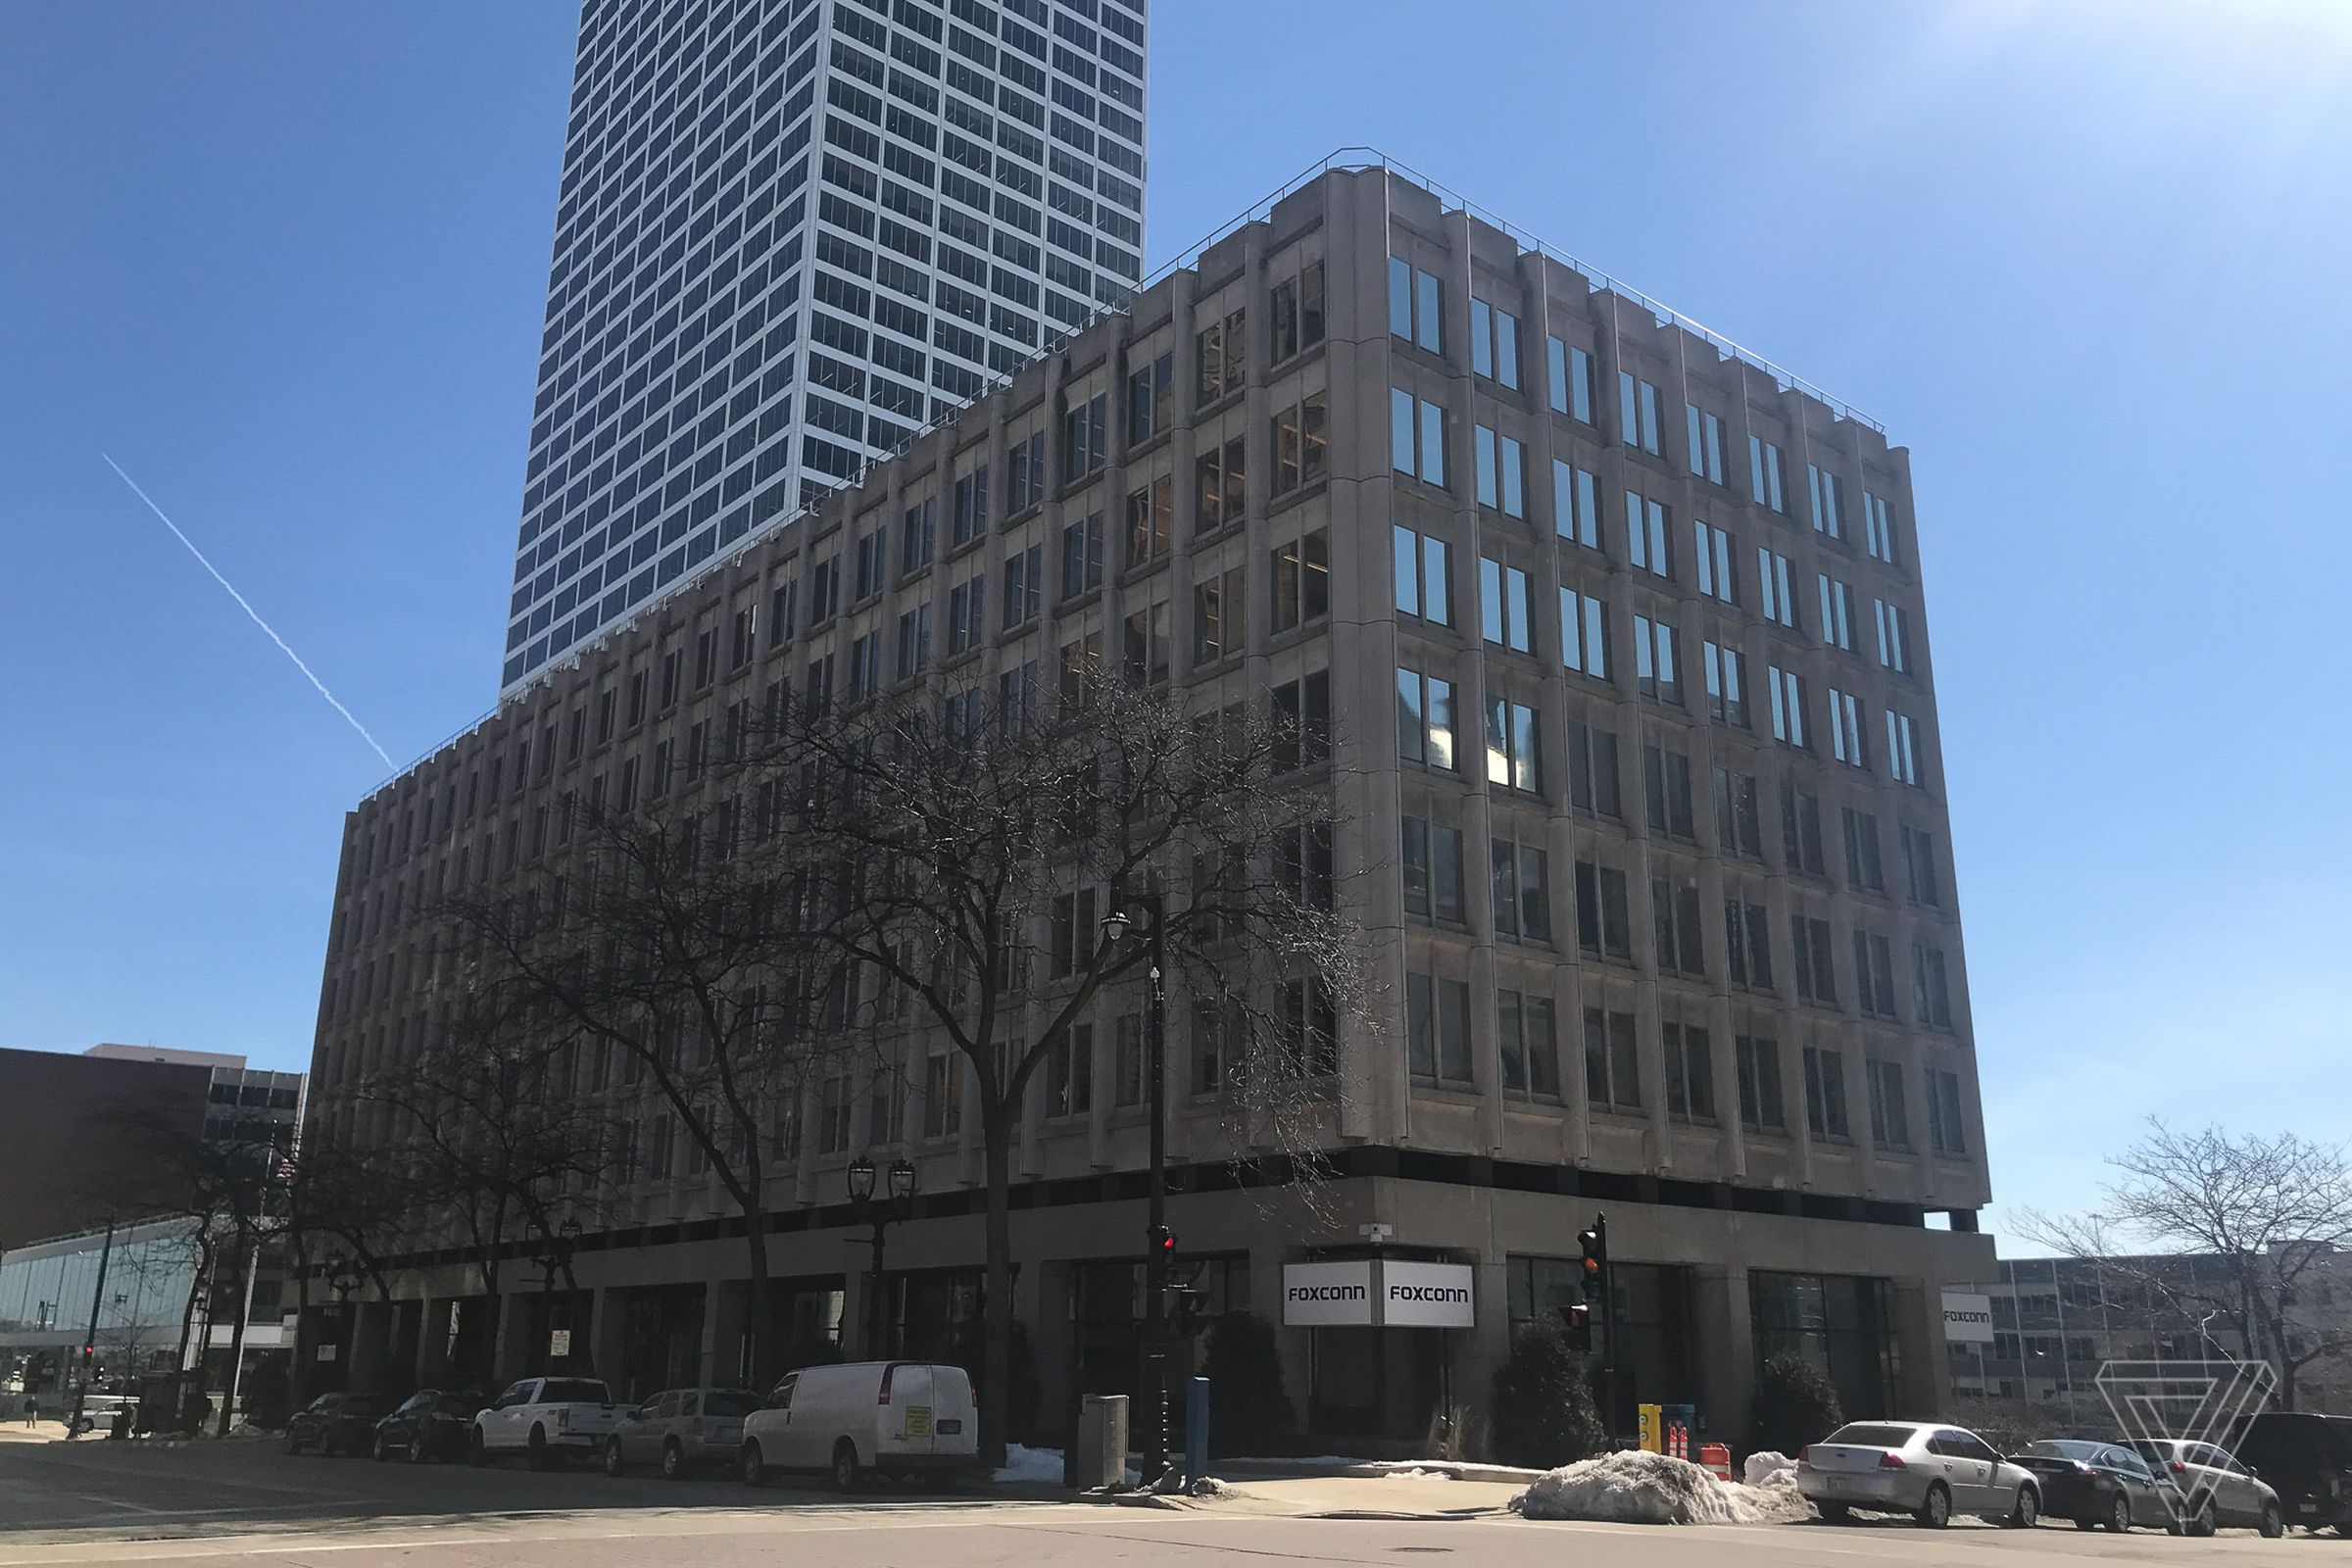 The Milwaukee office Foxconn bought last summer to serve as its North American corporate headquarters and innovation center.